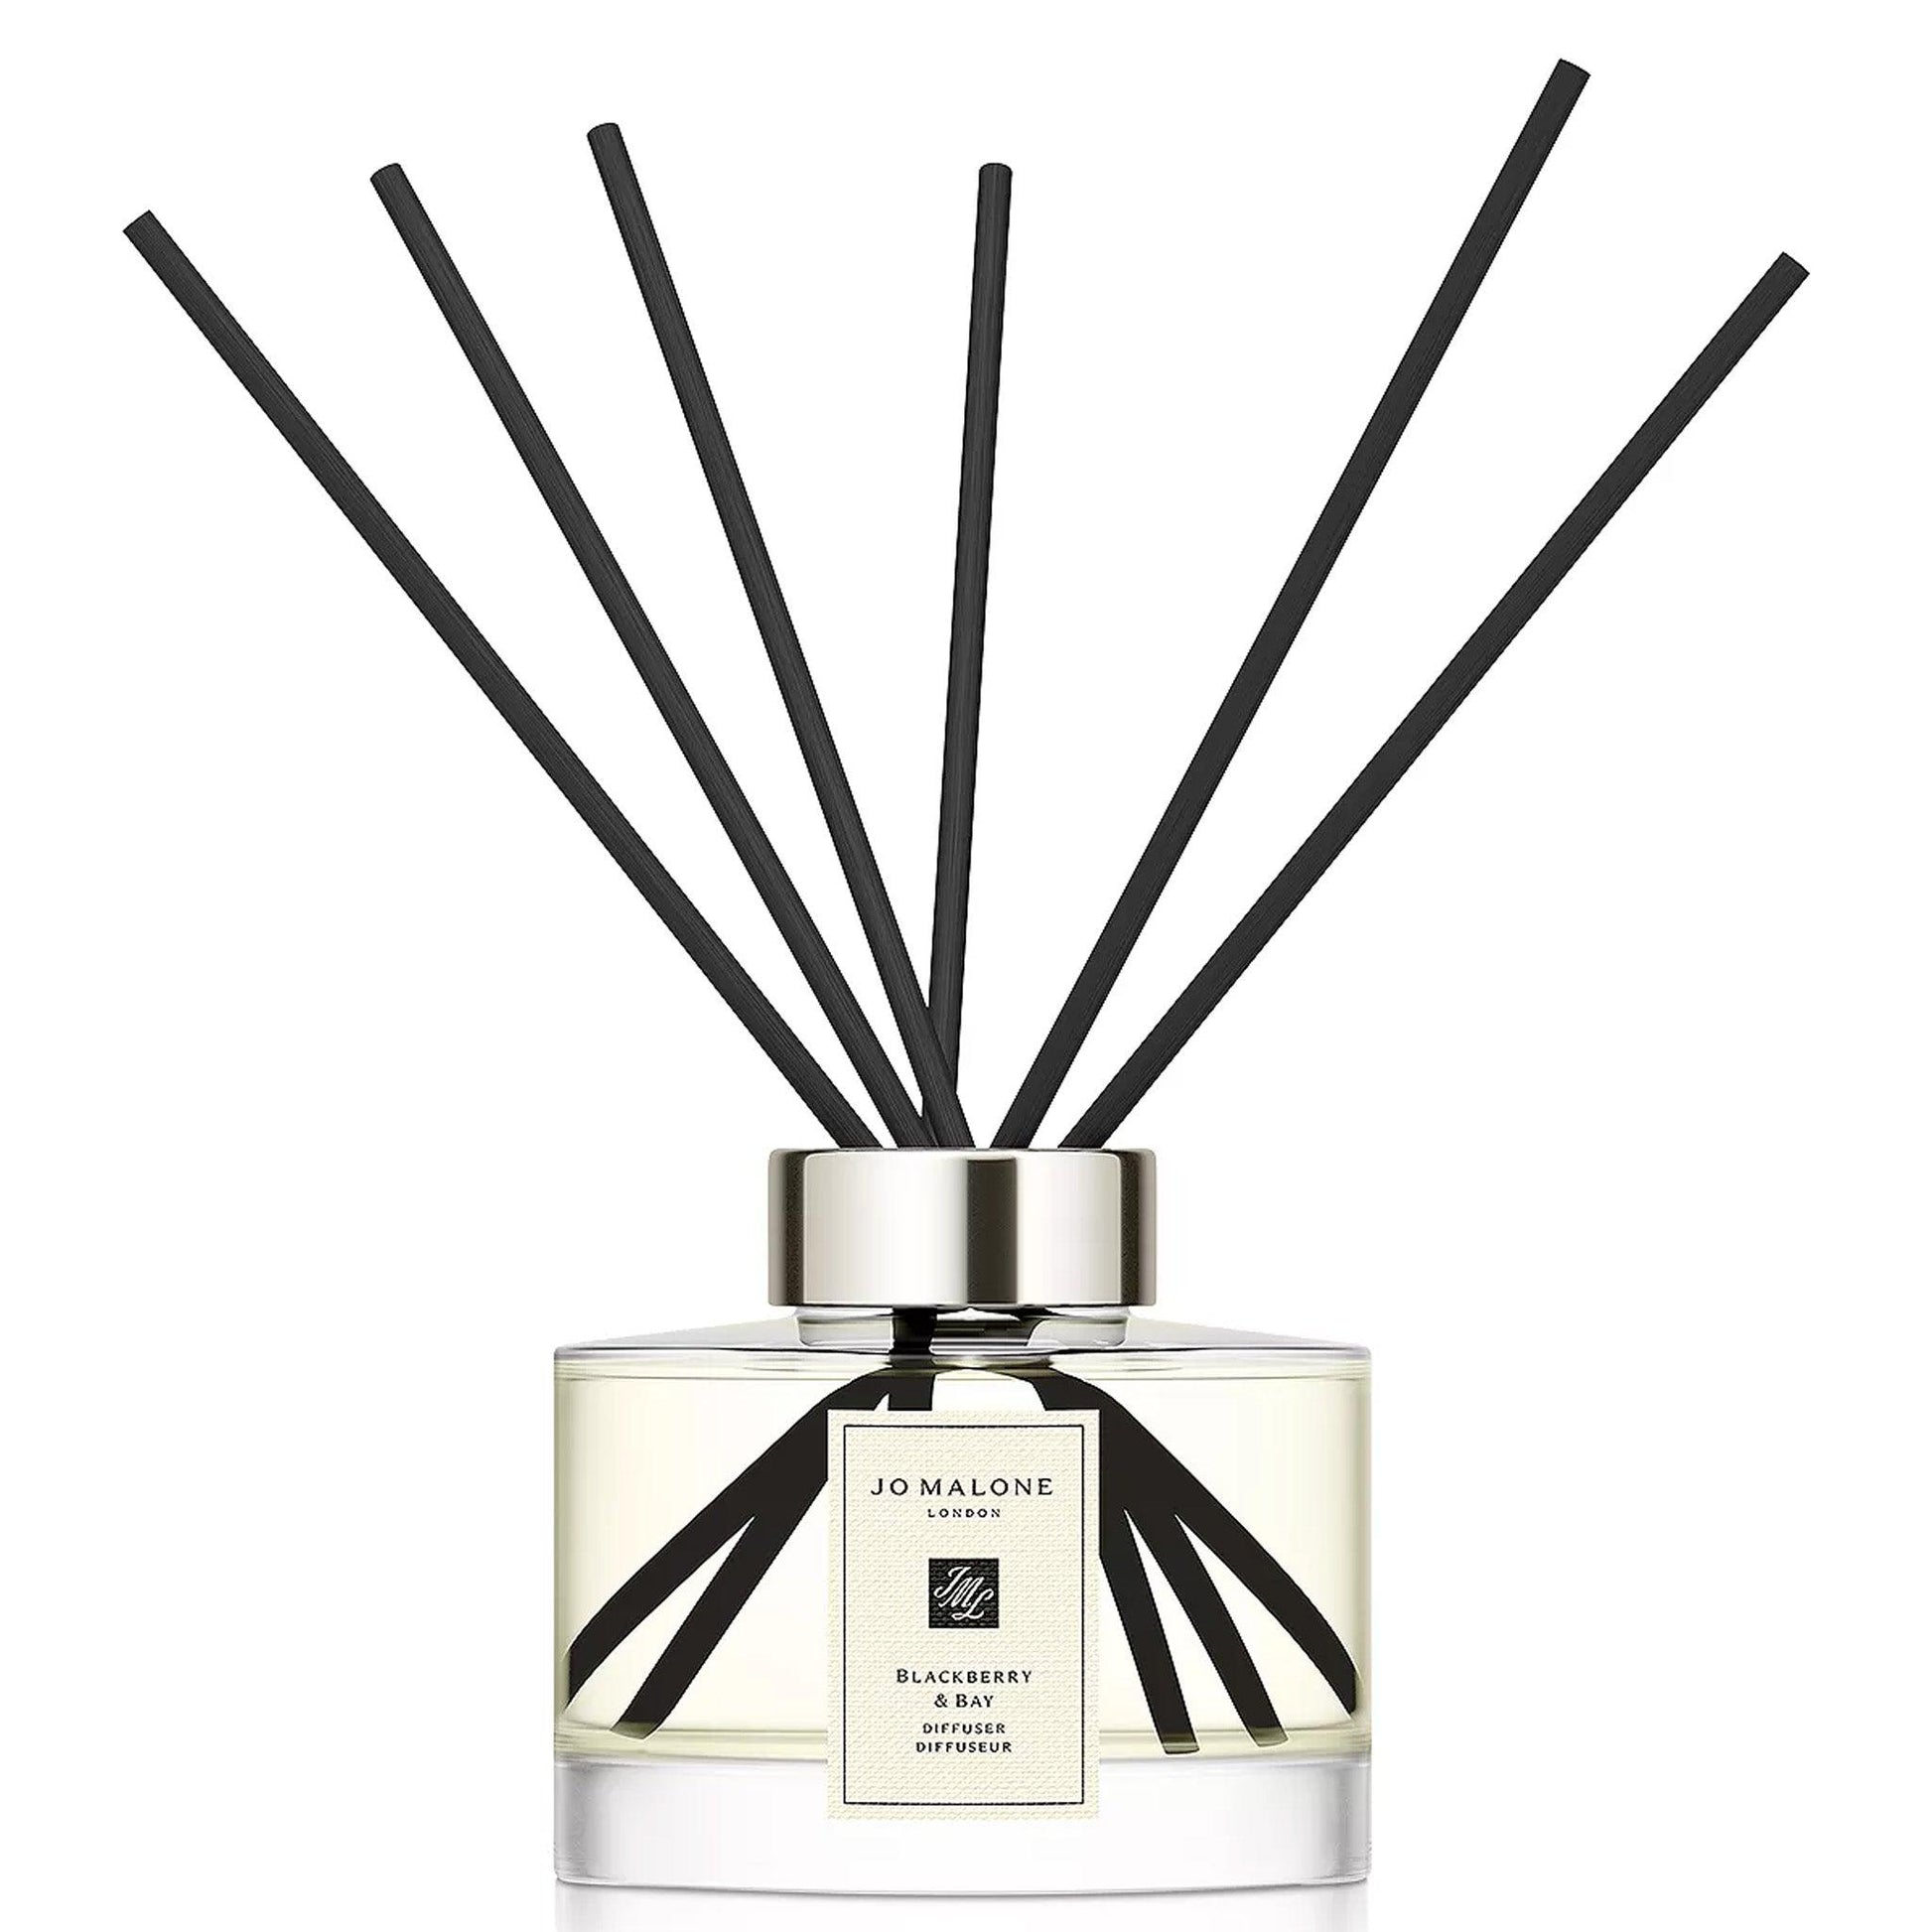 Blackberry & Bay Diffuser - Cosmos Boutique New Jersey